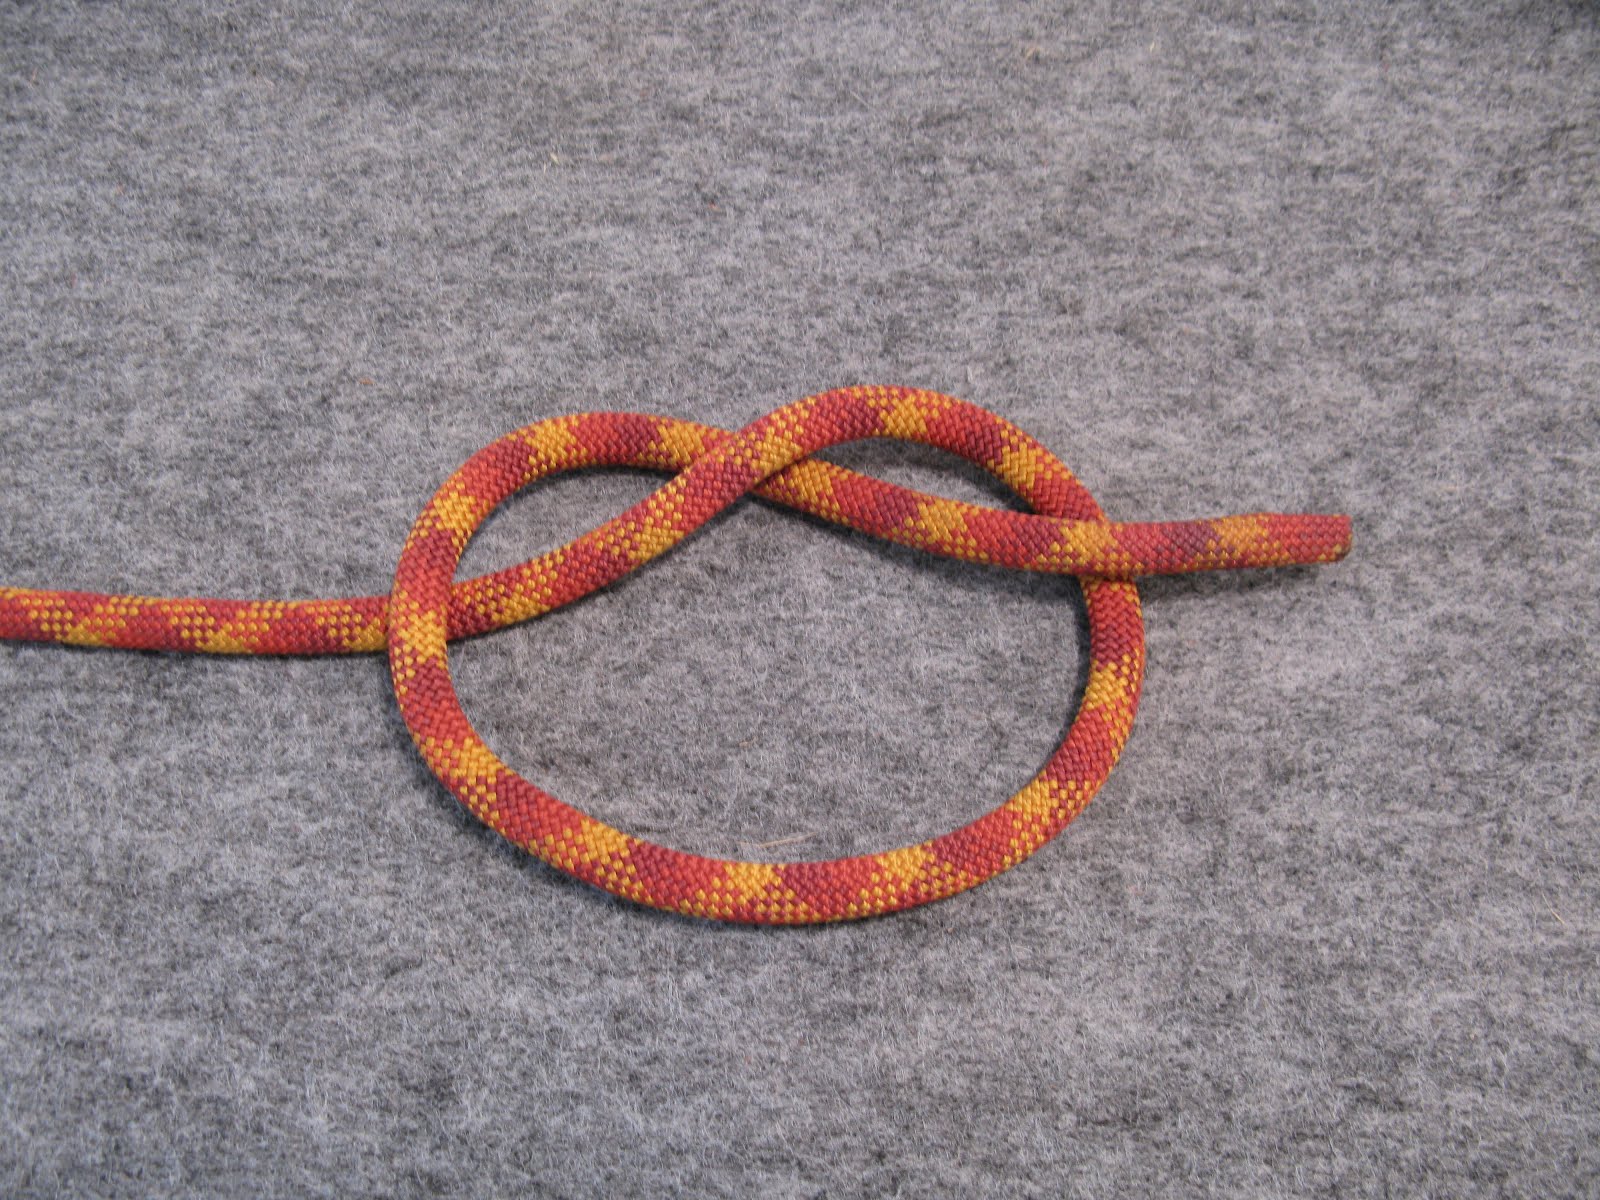 Bay Area Climbing - All Things Beta!: Knots for Climbers